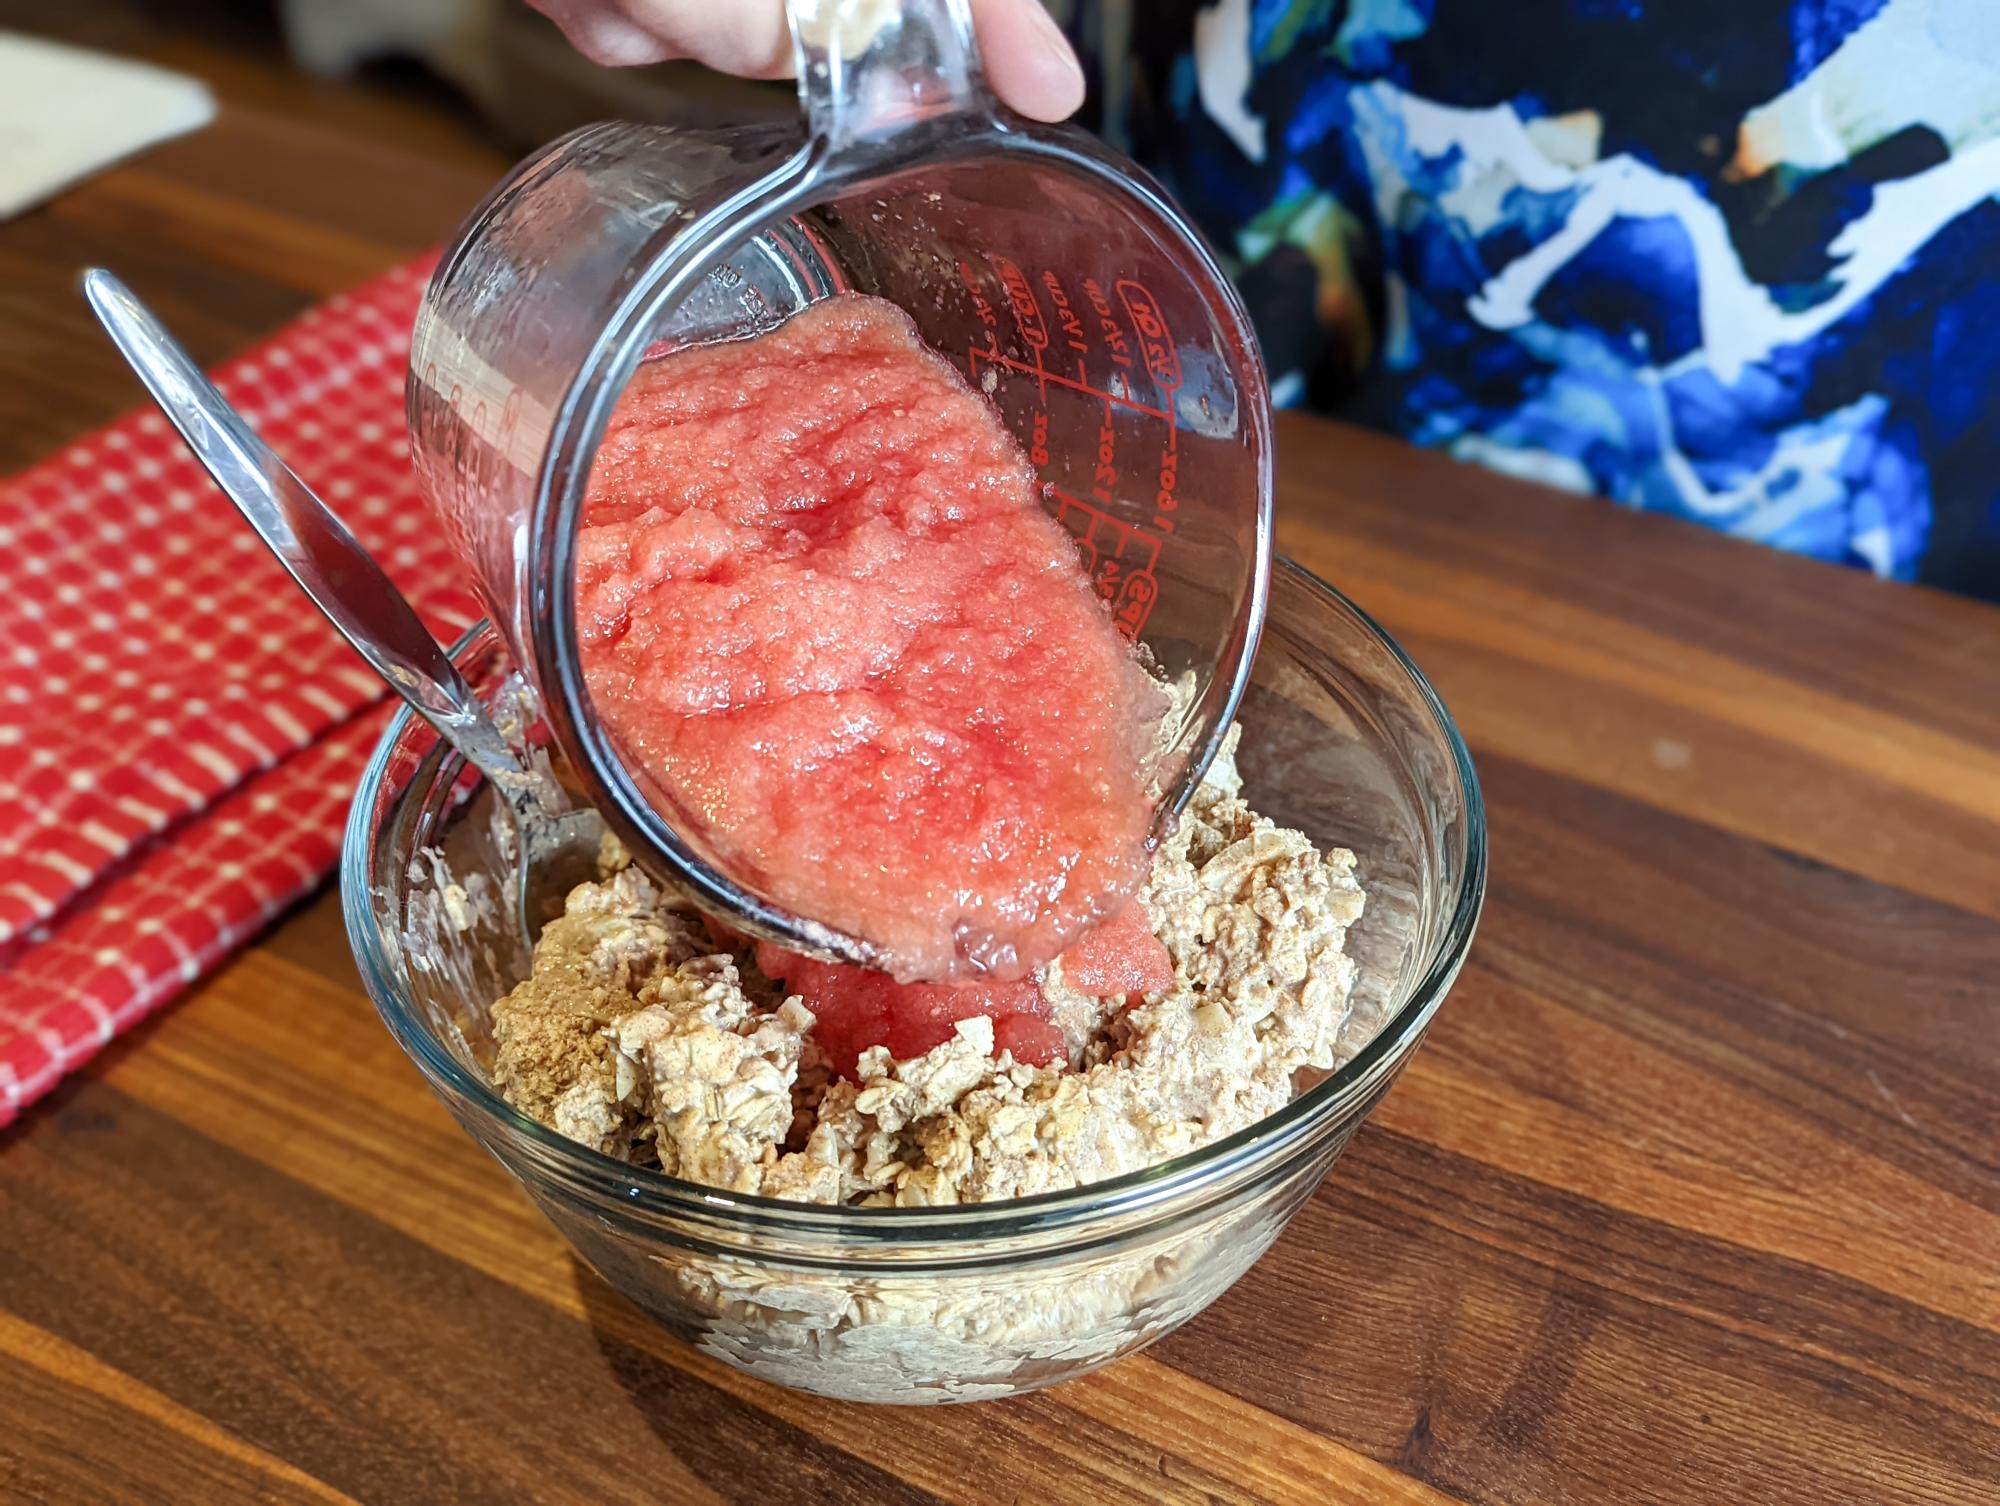 Adding the watermelon puree to the oats